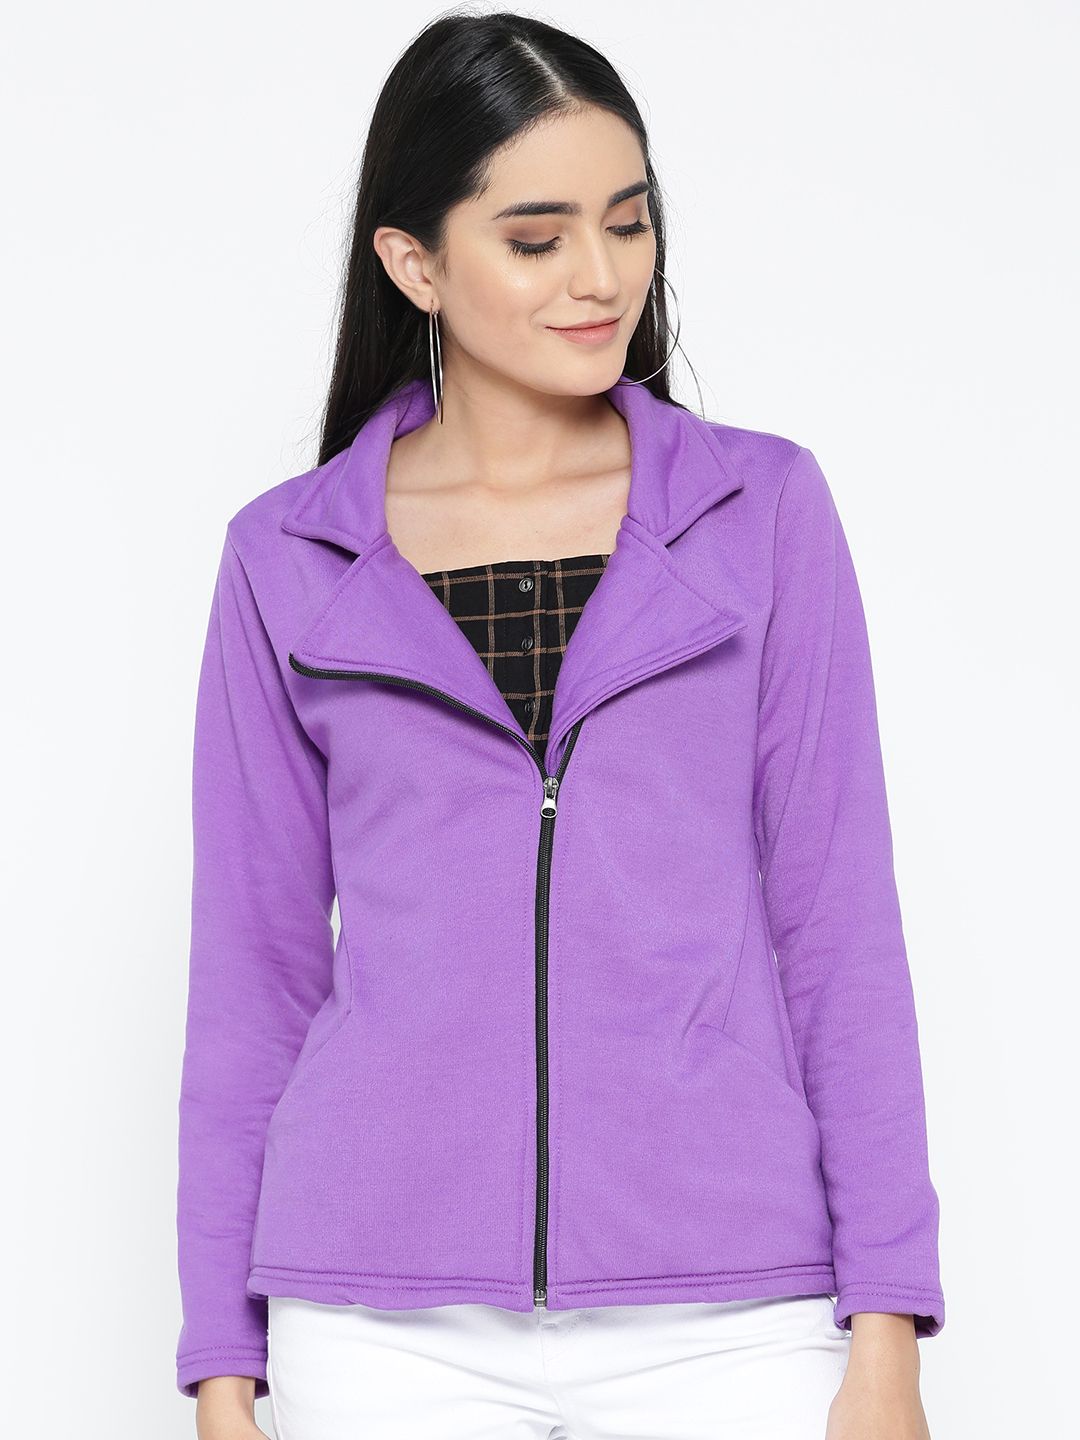 Belle Fille Women Purple Solid Asymmetric Closure Tailored Jacket Price in India